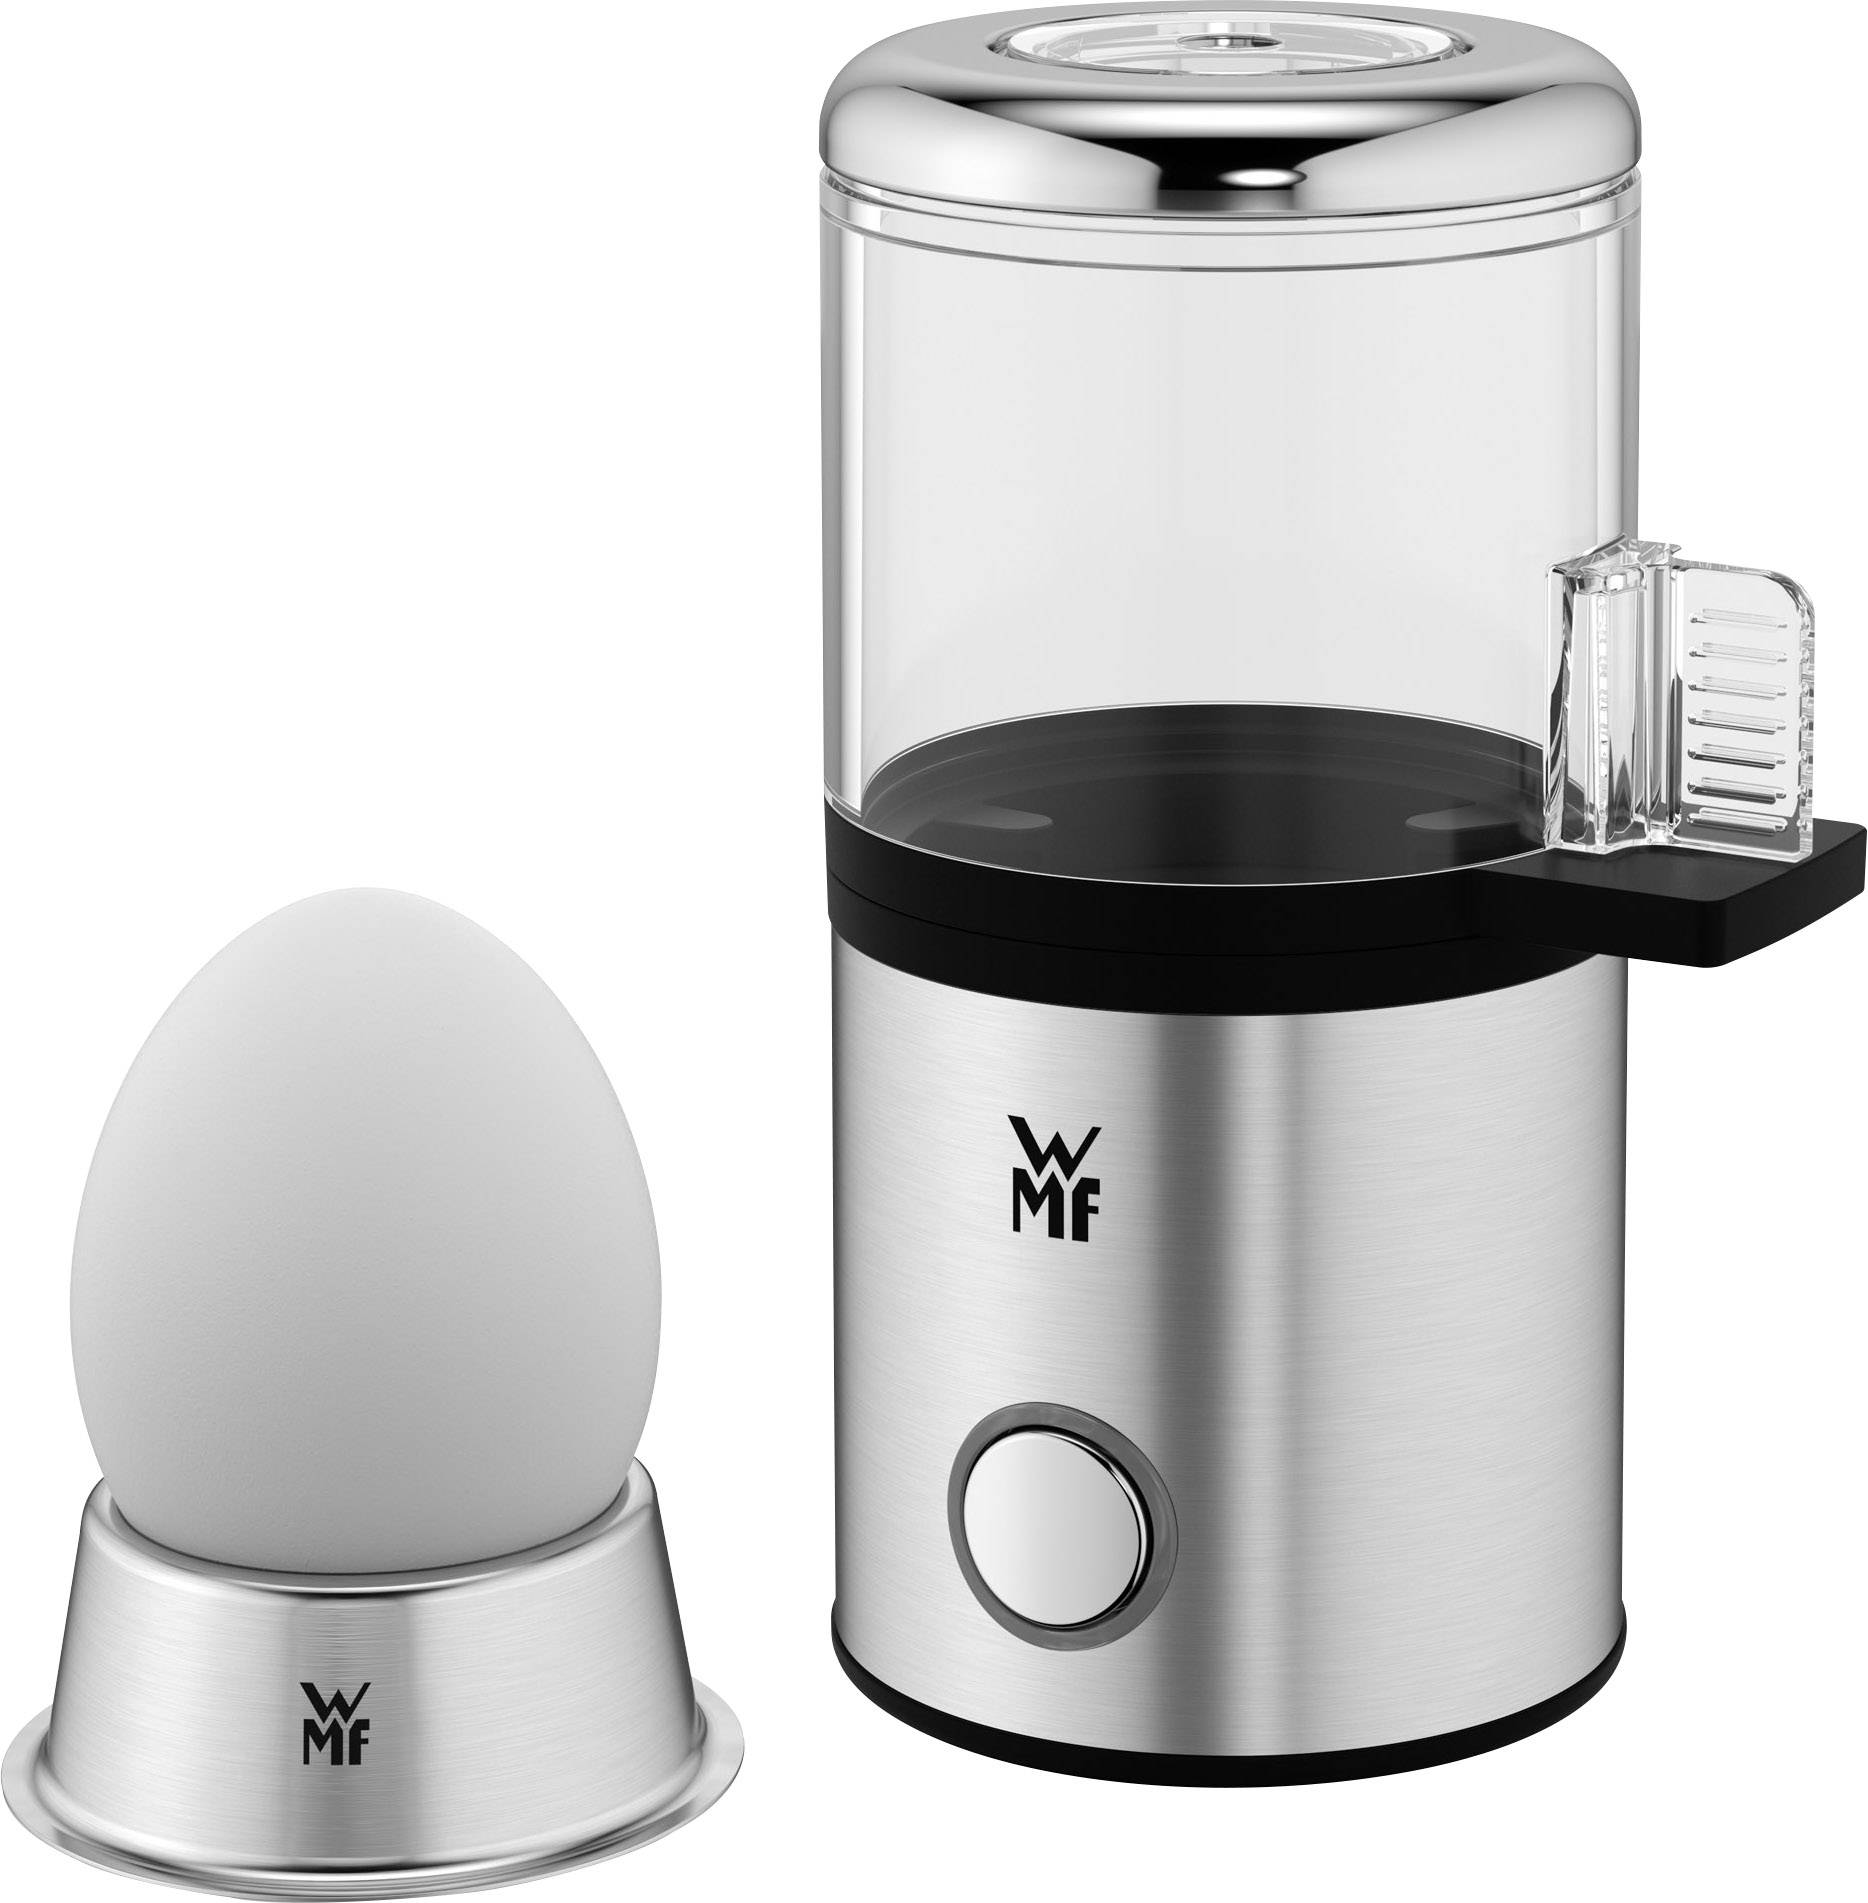 WMF Perfect Soft-boiled Egg Cooker – TheGermes